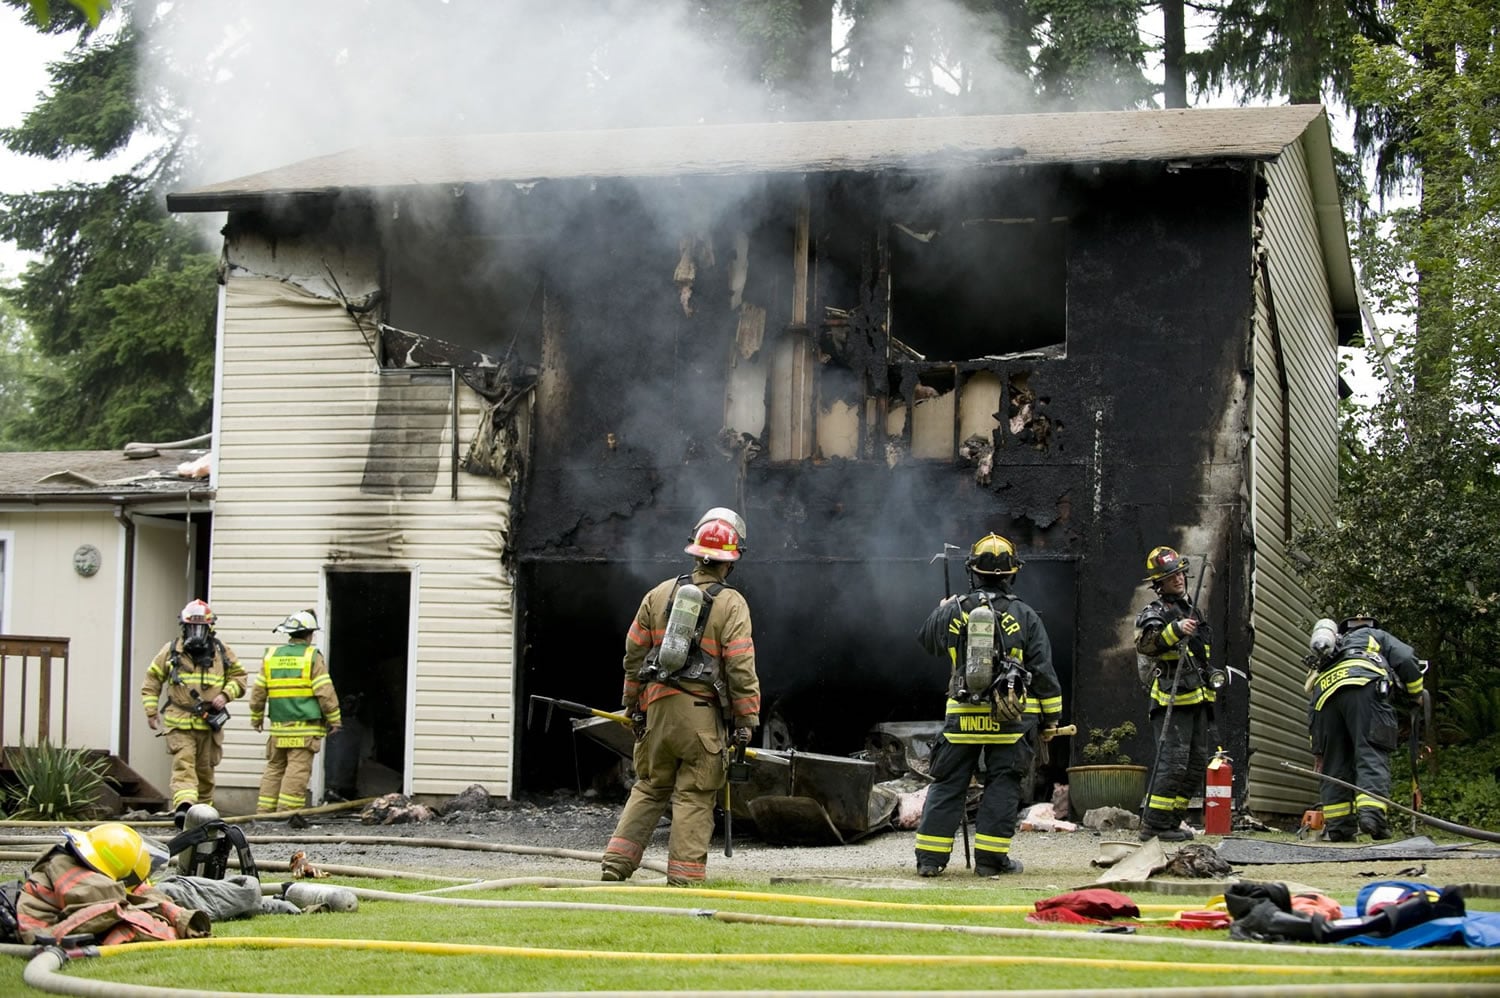 Flames escaped as the door warped on this garage, spread up the vinyl siding and entered the rooms above.